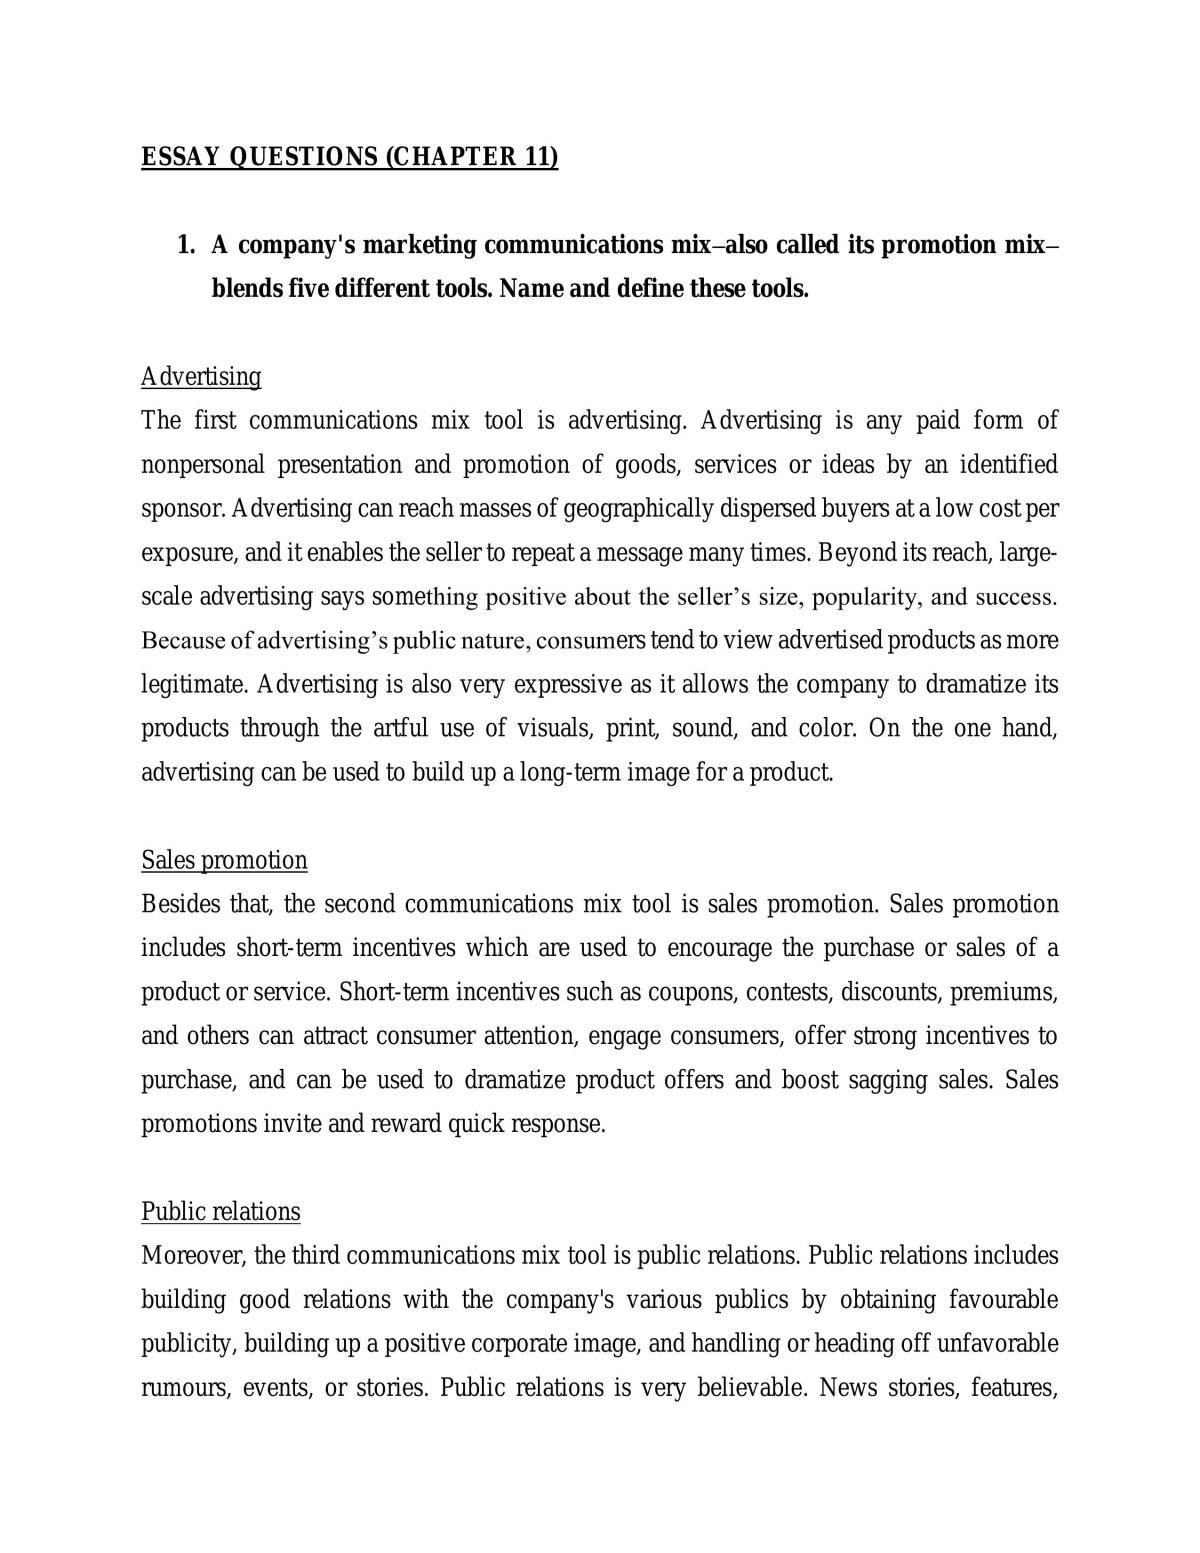 essay questions about marketing